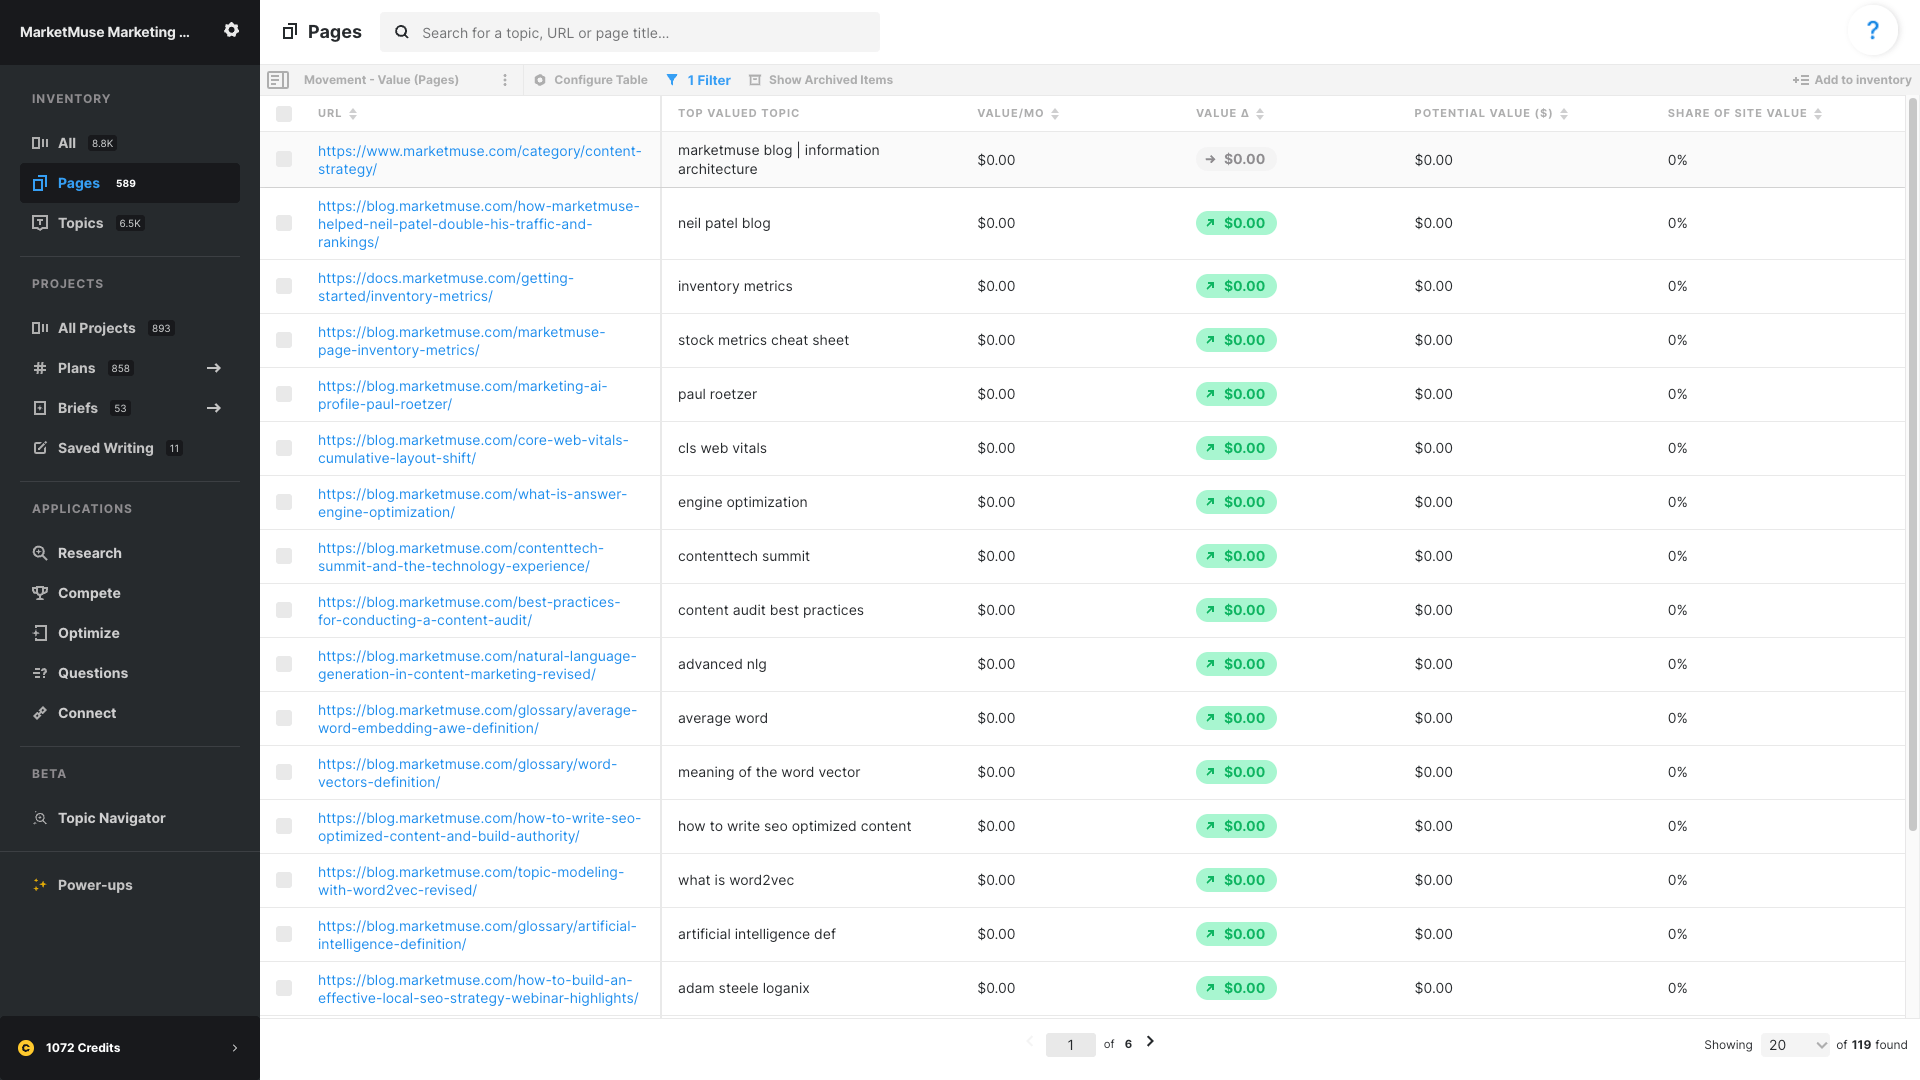 MarketMuse Saved View Movement - Value (Pages) showing a table with the following data columns; URL, TOP VALUED TOPIC, VALUE/MO, VALUE Δ	POTENTIAL VALUE ($), and SHARE OF SITE VALUE.